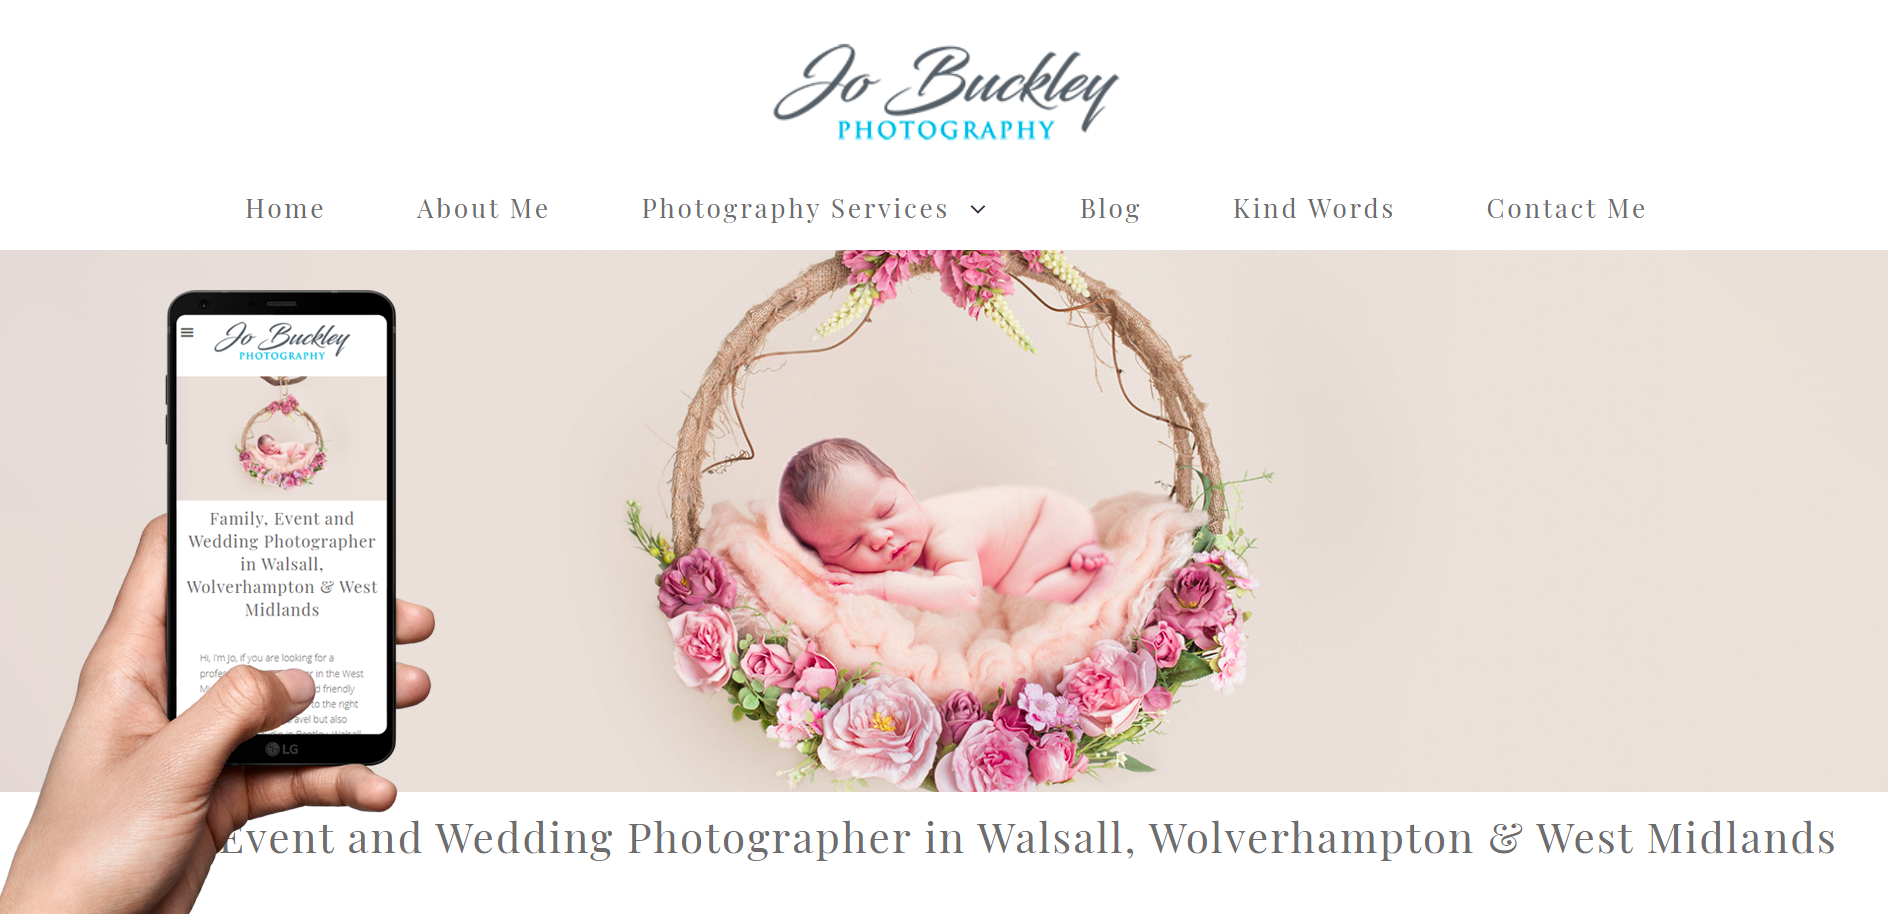 Family Event Wedding photography Walsall Wolverhampton and West Midlands - Jo Buckley Photography